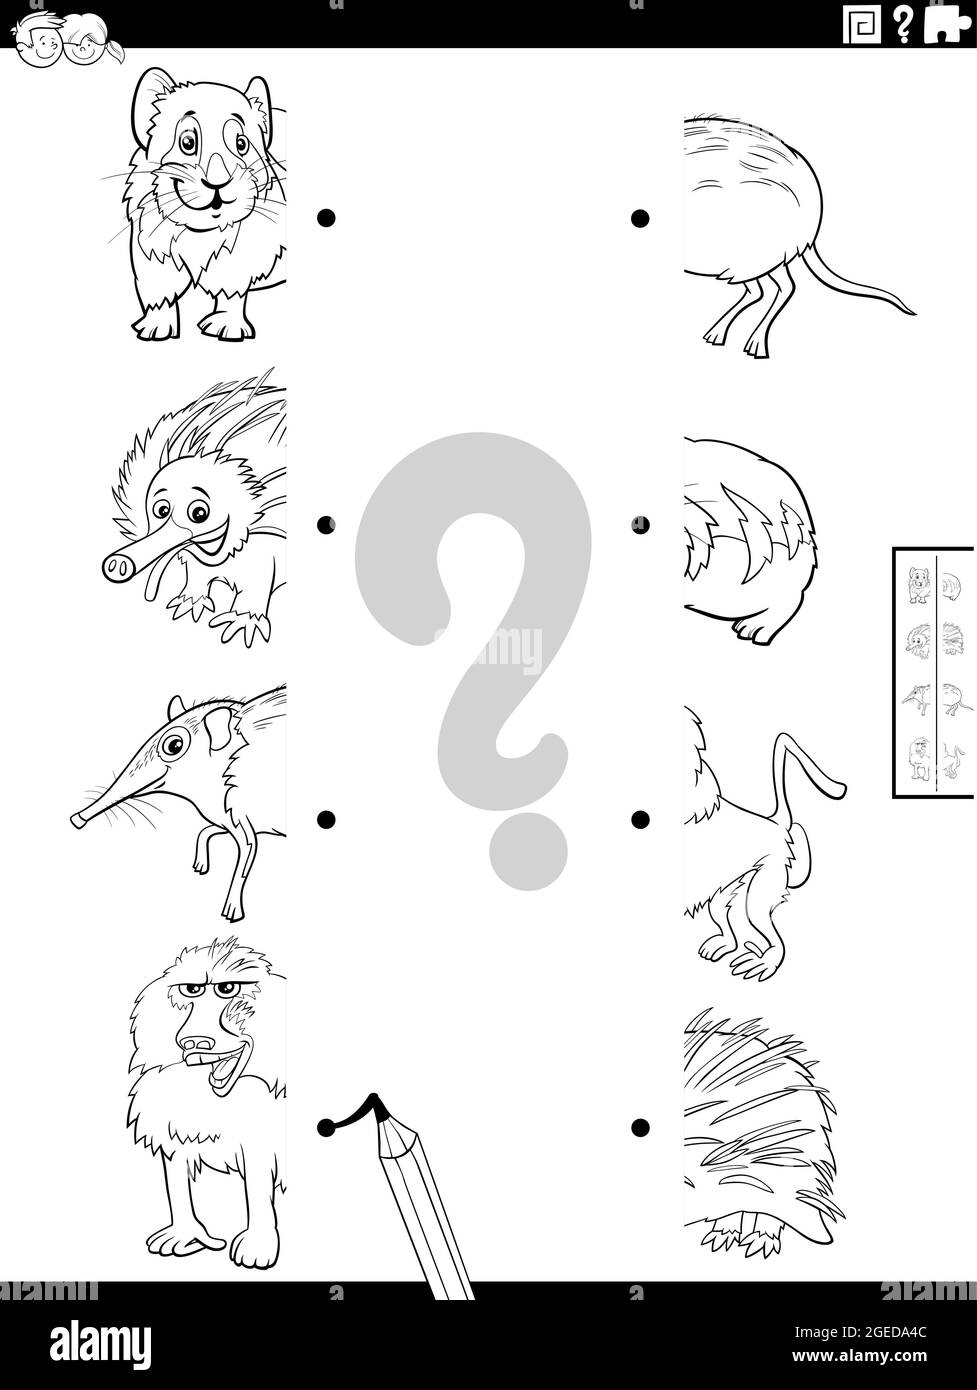 Black and white cartoon illustration of educational game of matching halves of pictures with wild animals characters coloring book page Stock Vector